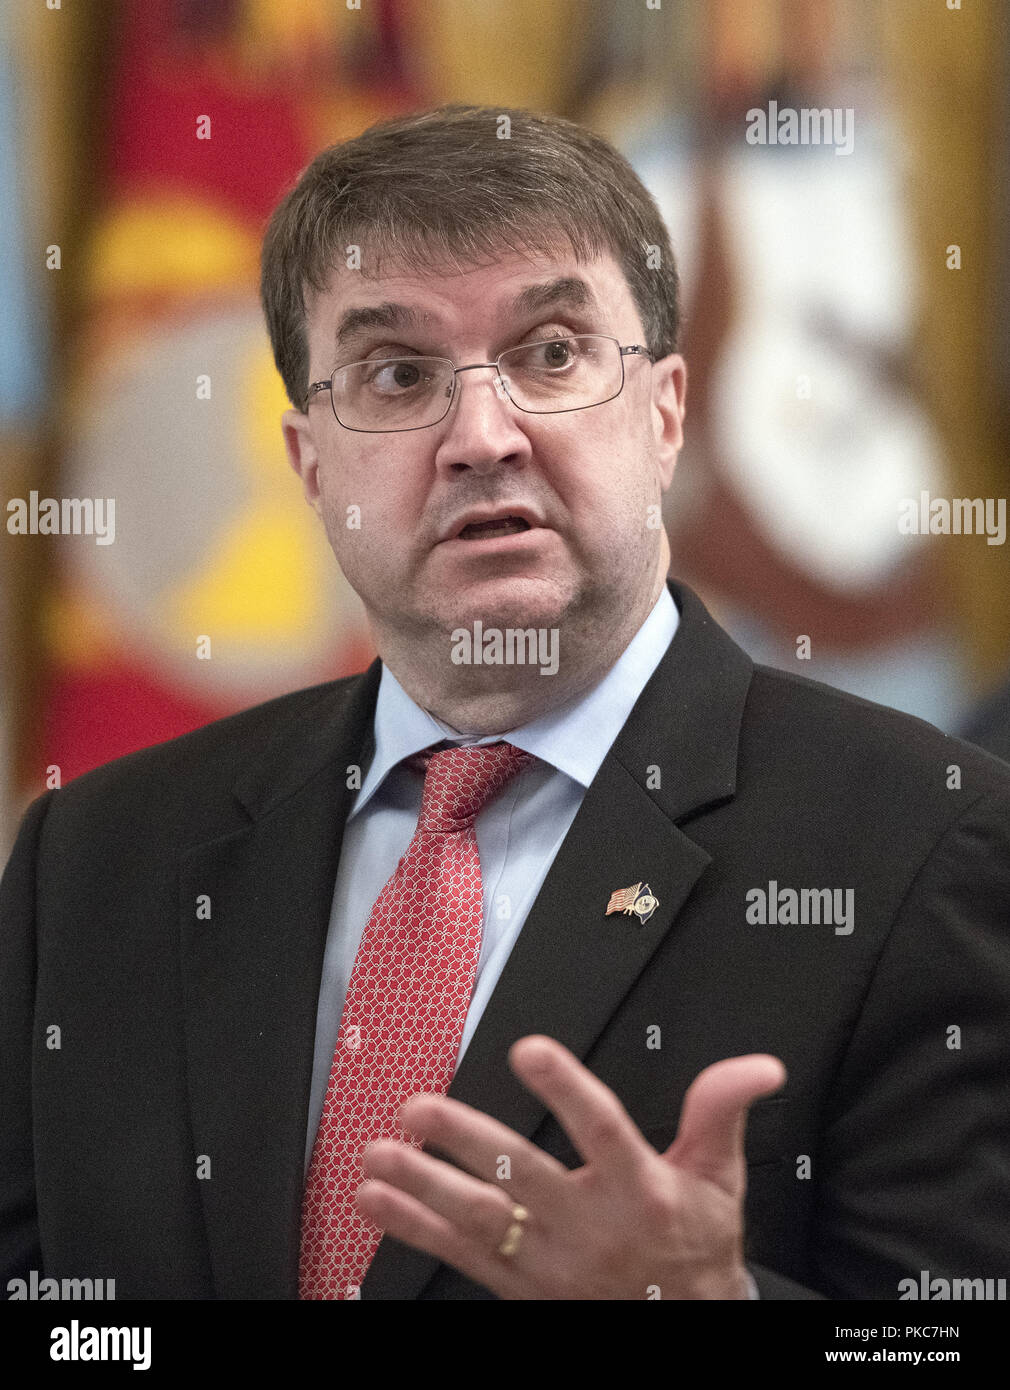 Washington, District of Columbia, USA. 12th Sep, 2018. United States Secretary of Veterans Affairs Robert Wilkie, prior to the arrival of US President Donald J. Trump who will make remarks at the Congressional Medal of Honor Society Reception in the East Room of the White House in Washington, DC on Wednesday, September 12, 2018 Credit: Ron Sachs/CNP/ZUMA Wire/Alamy Live News Stock Photo